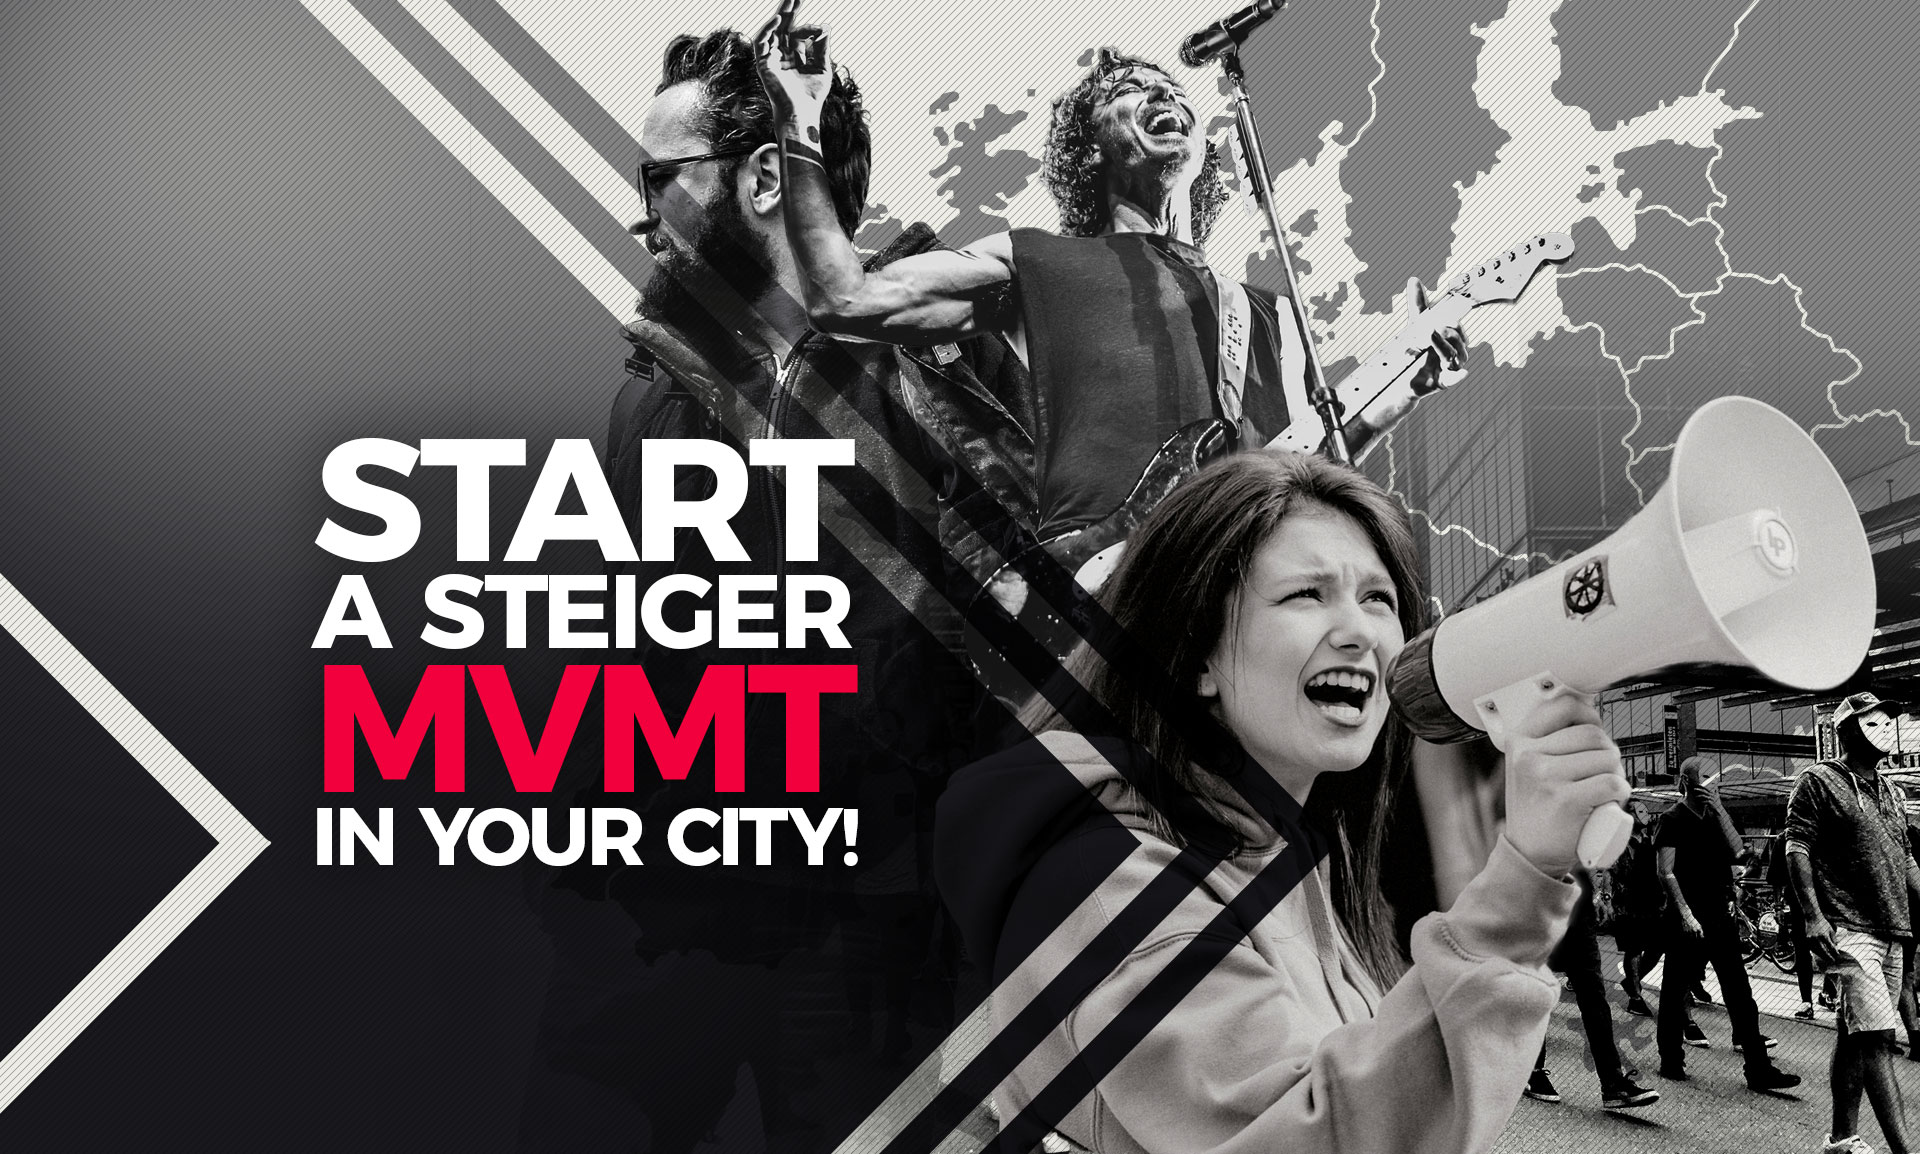 Steiger’s vision is to raise up a radical missionary movement that will transform the Global Youth Culture for Jesus. We do this by mobilizing followers of Jesus to reach young people who would not walk into a church.